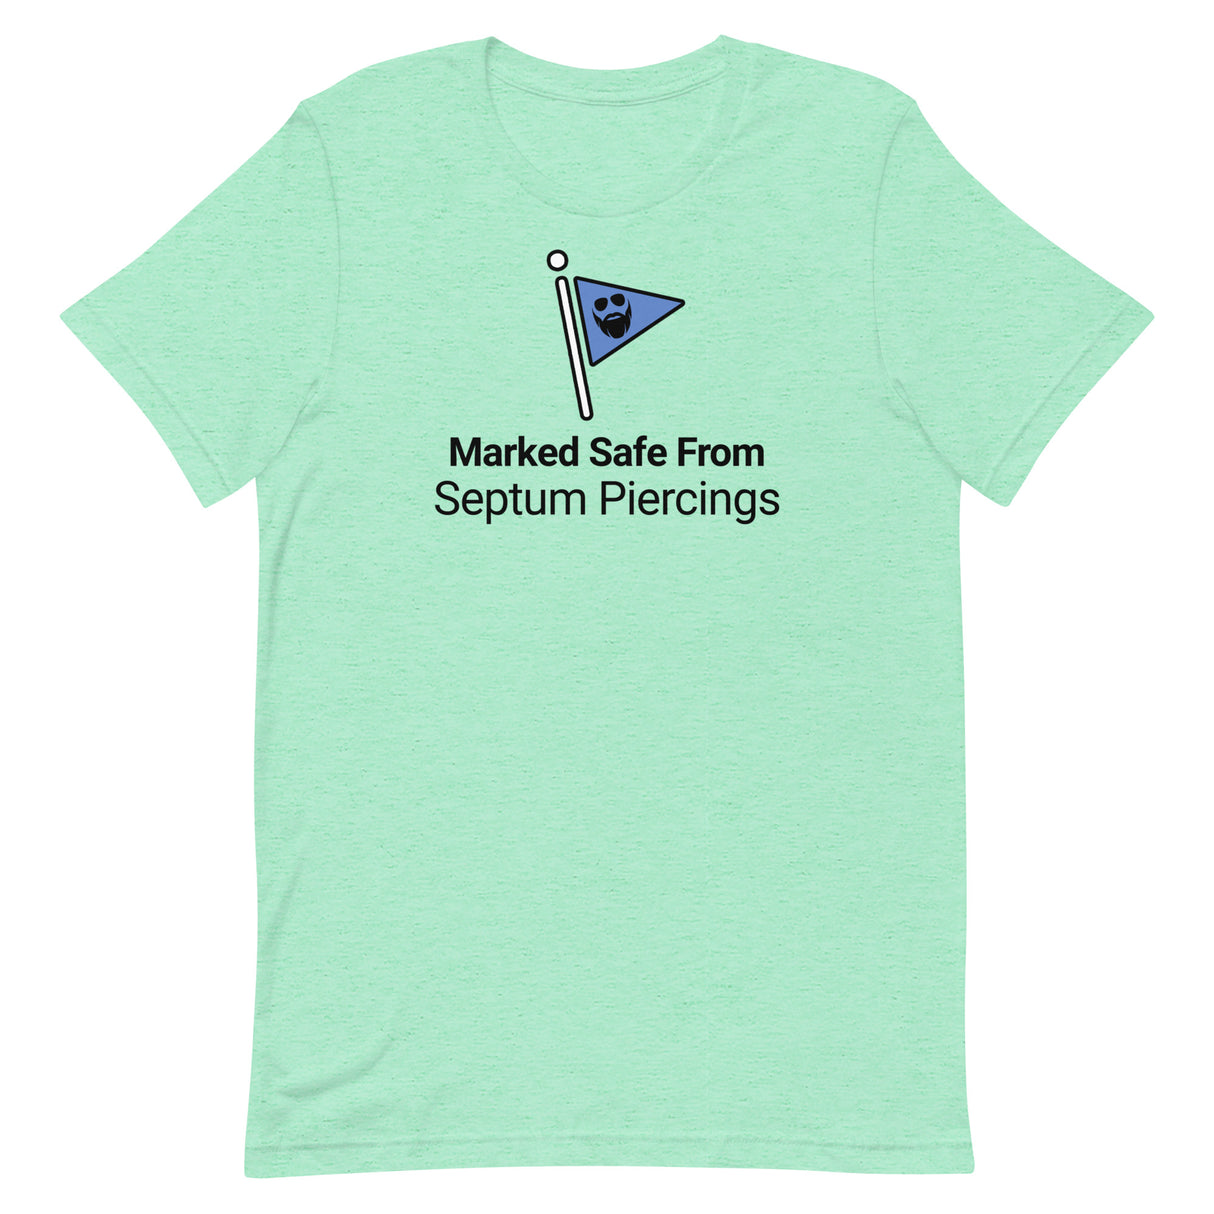 Marked Safe From Septum Piercings T-Shirt